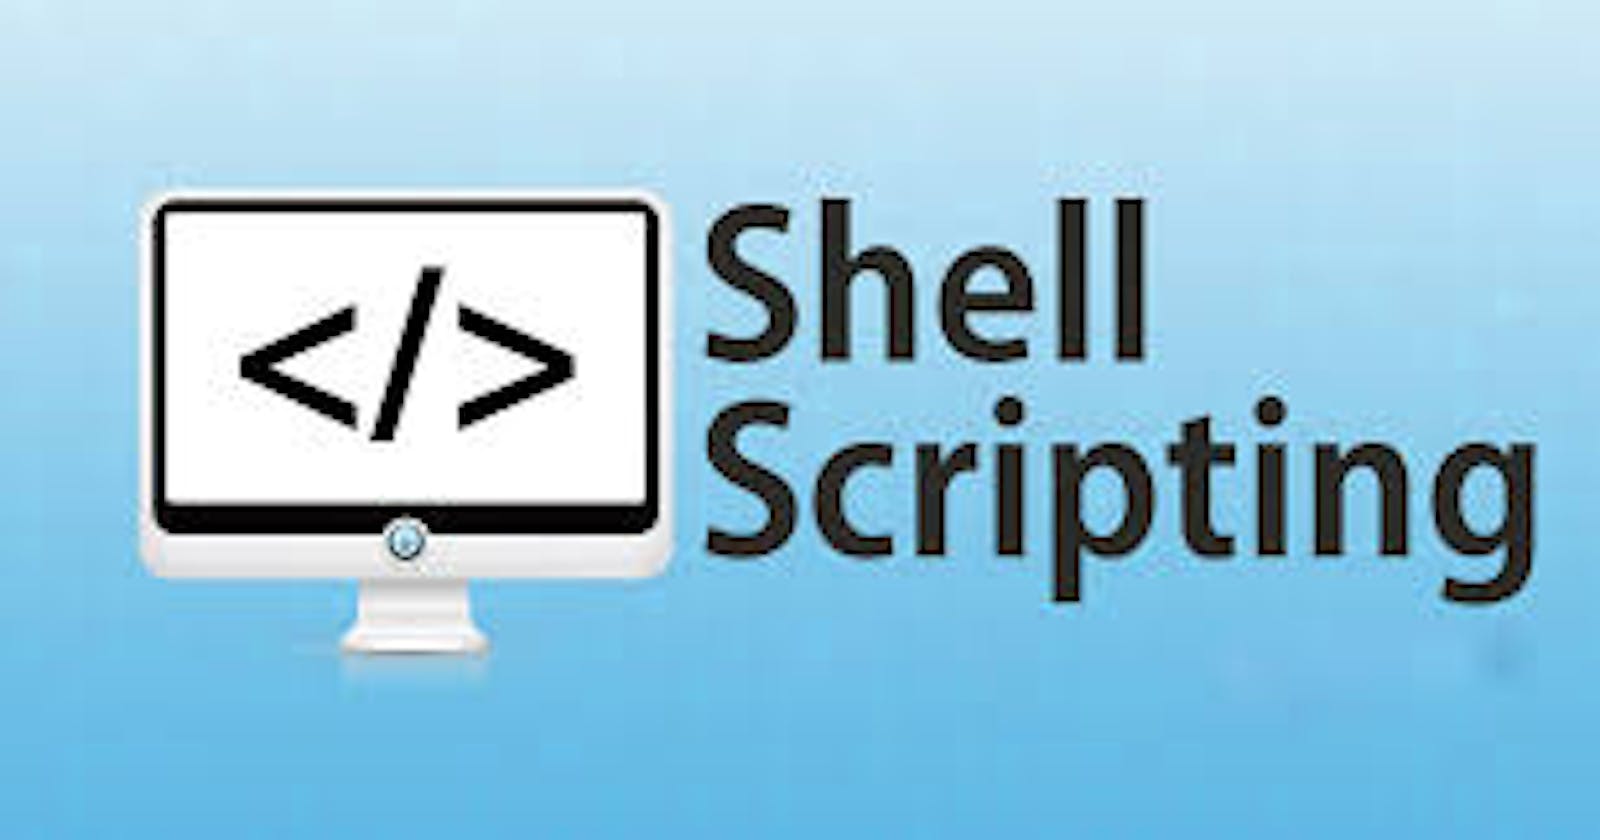 Introduction To Shell Scripting